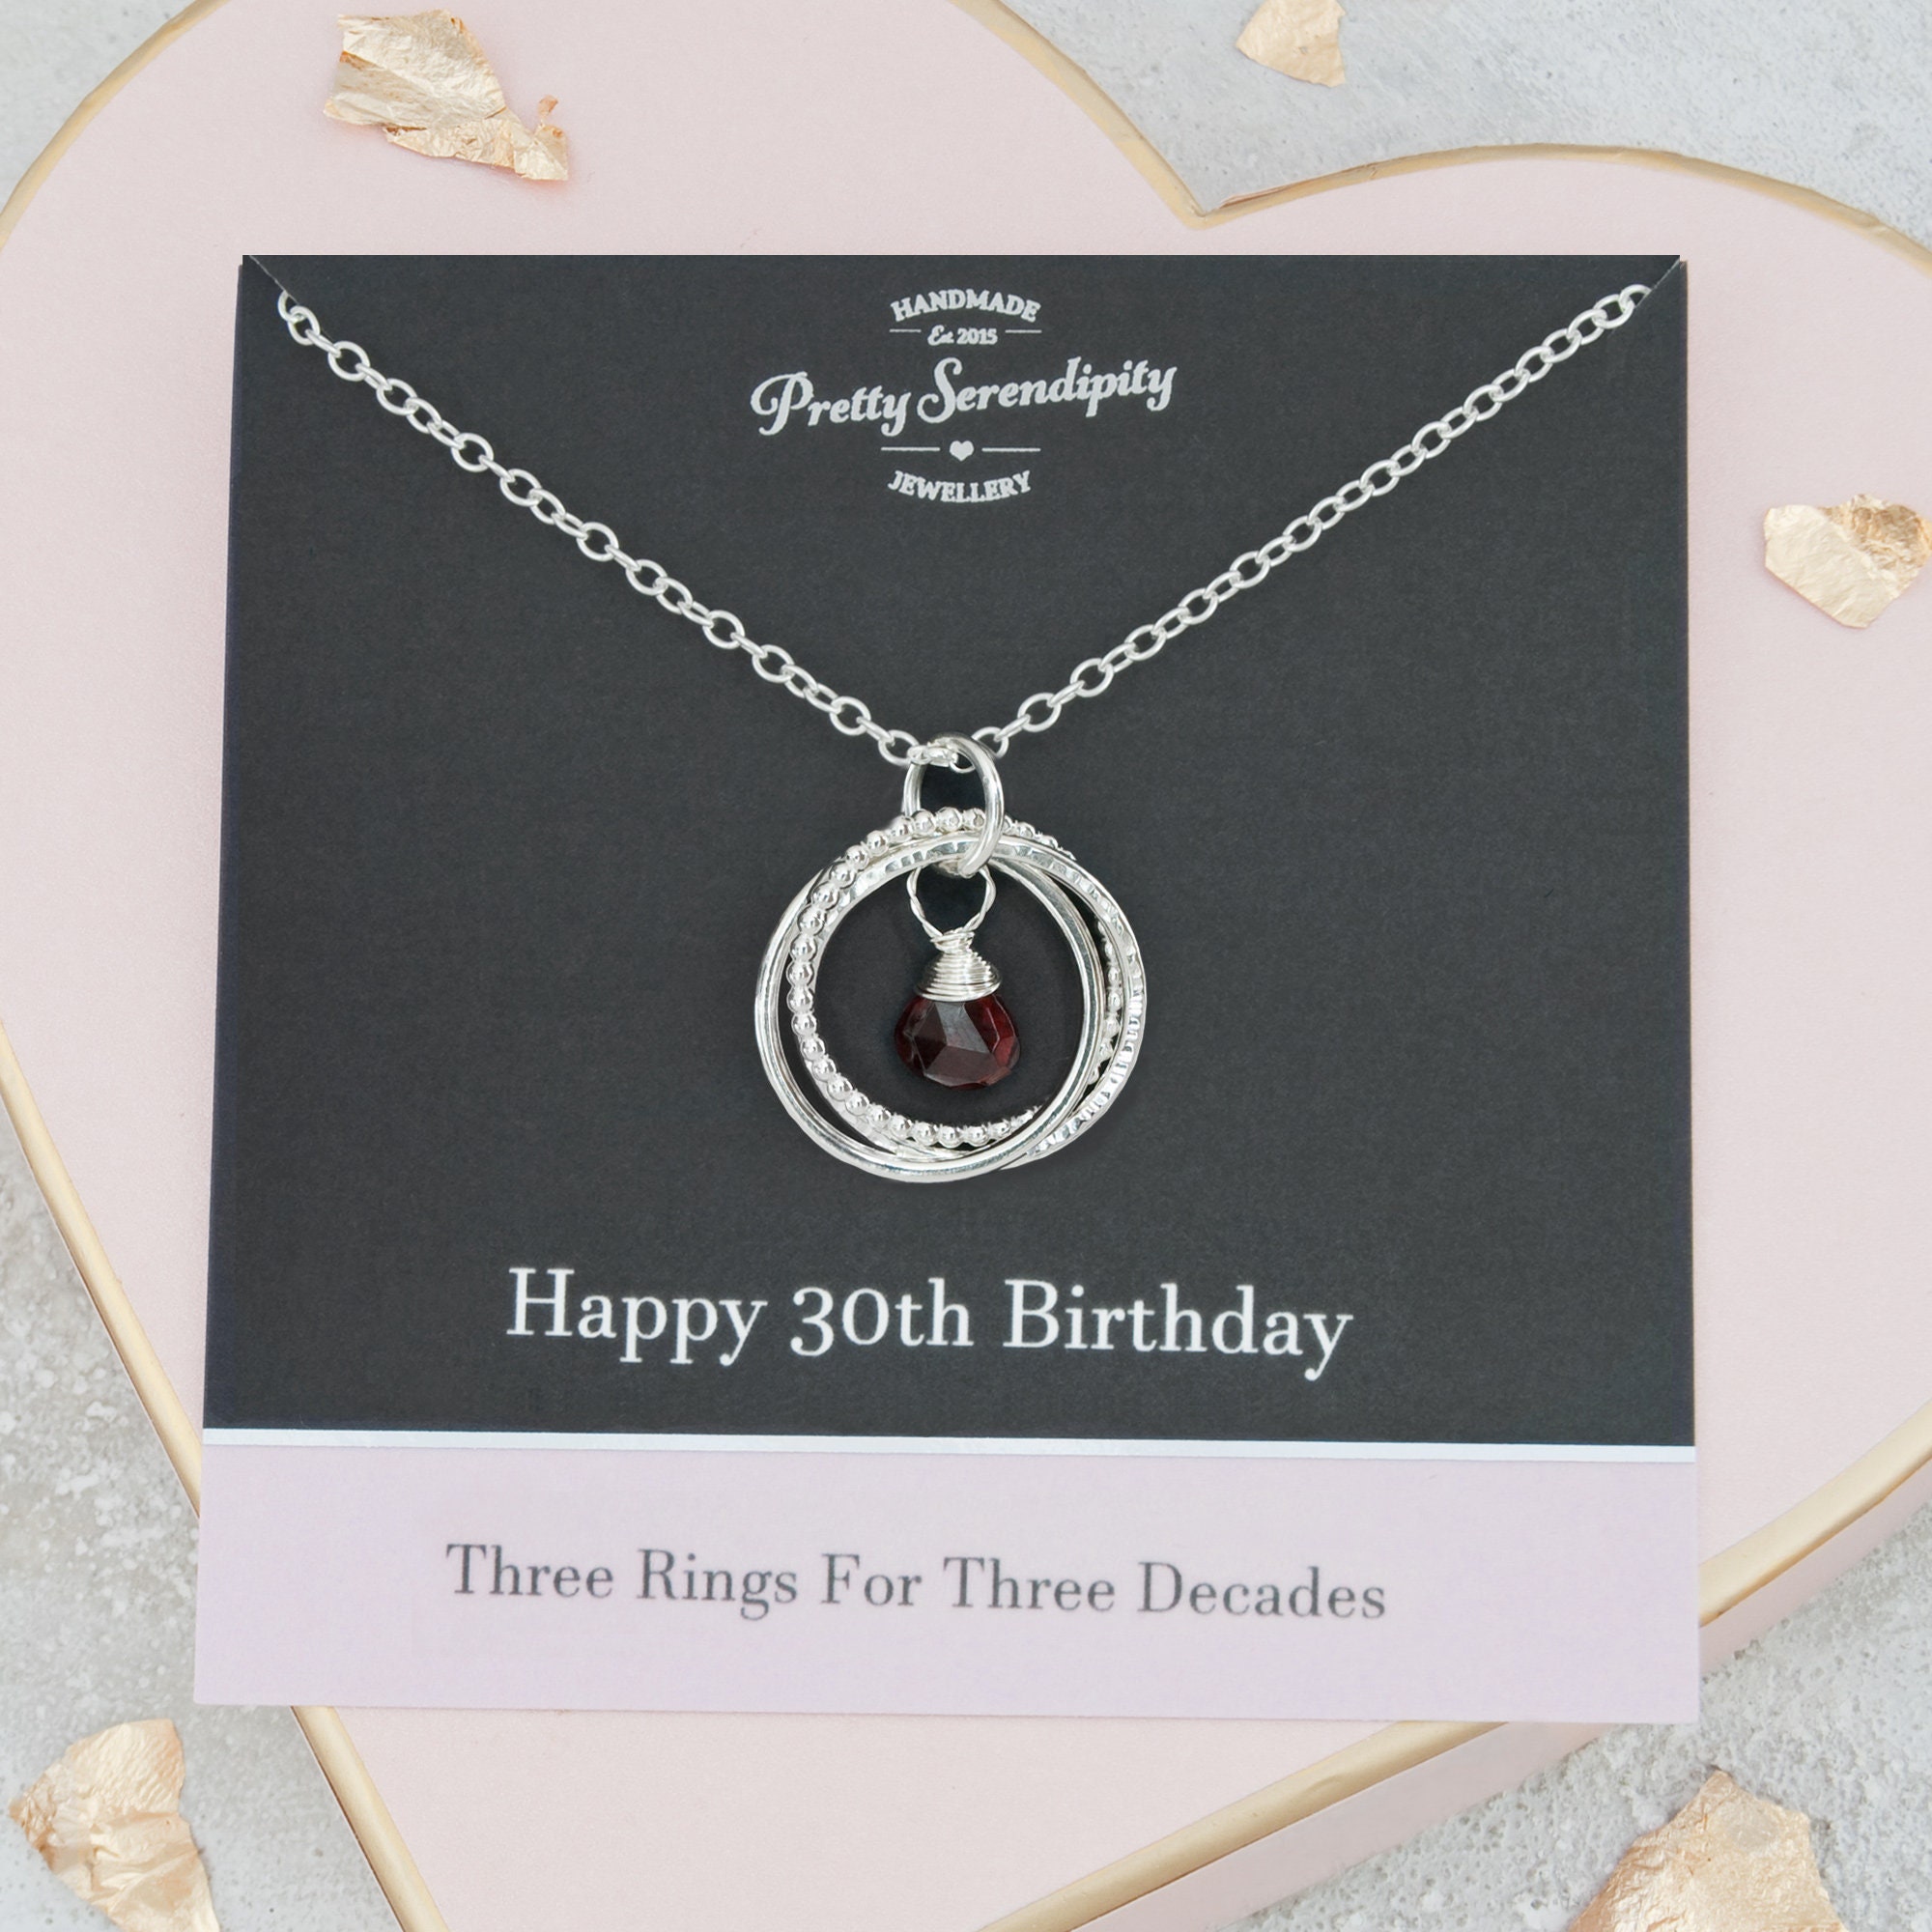 30Th Birthday Birthstone Necklace - Textured Sterling Silver, 3 Rings For Decades, Gift Her